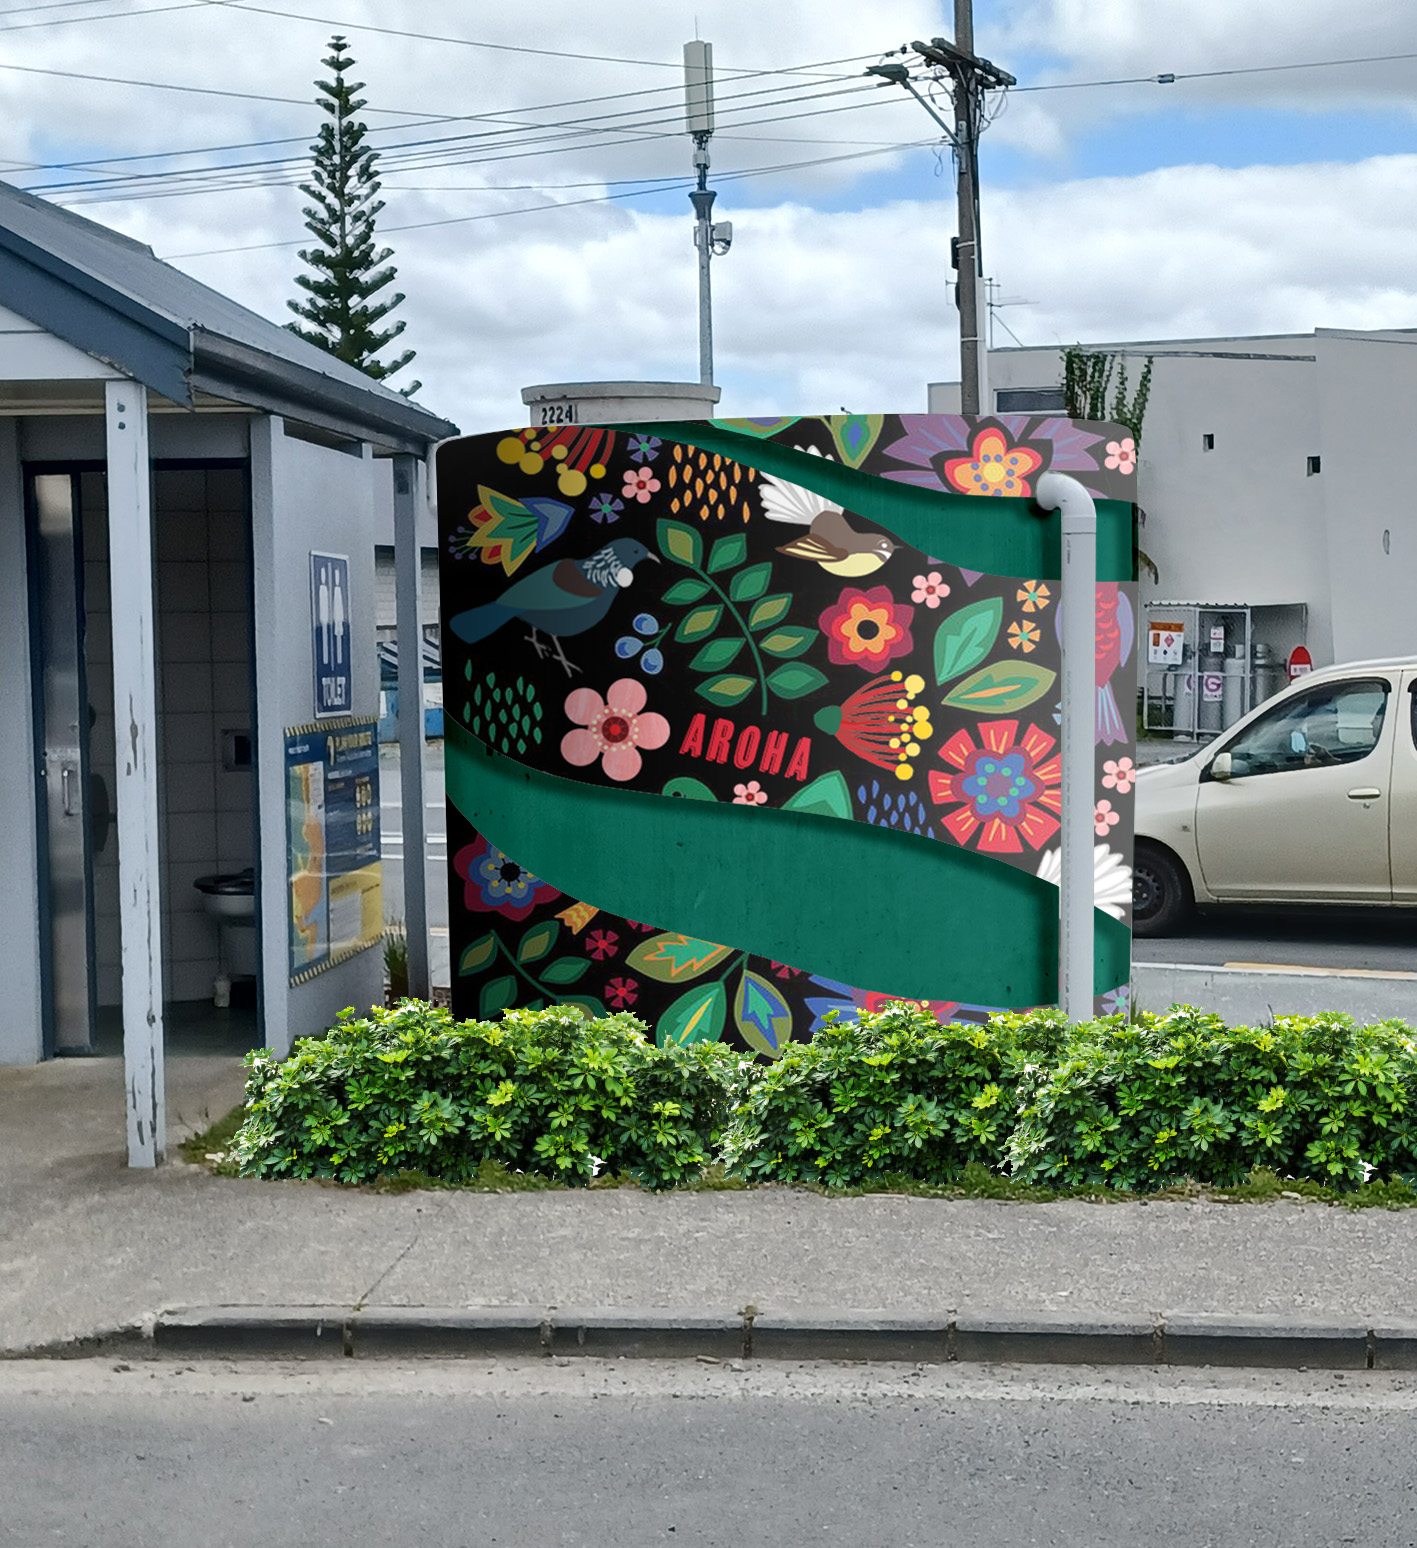 Water tank with images of flowers, fern and a tui bird.